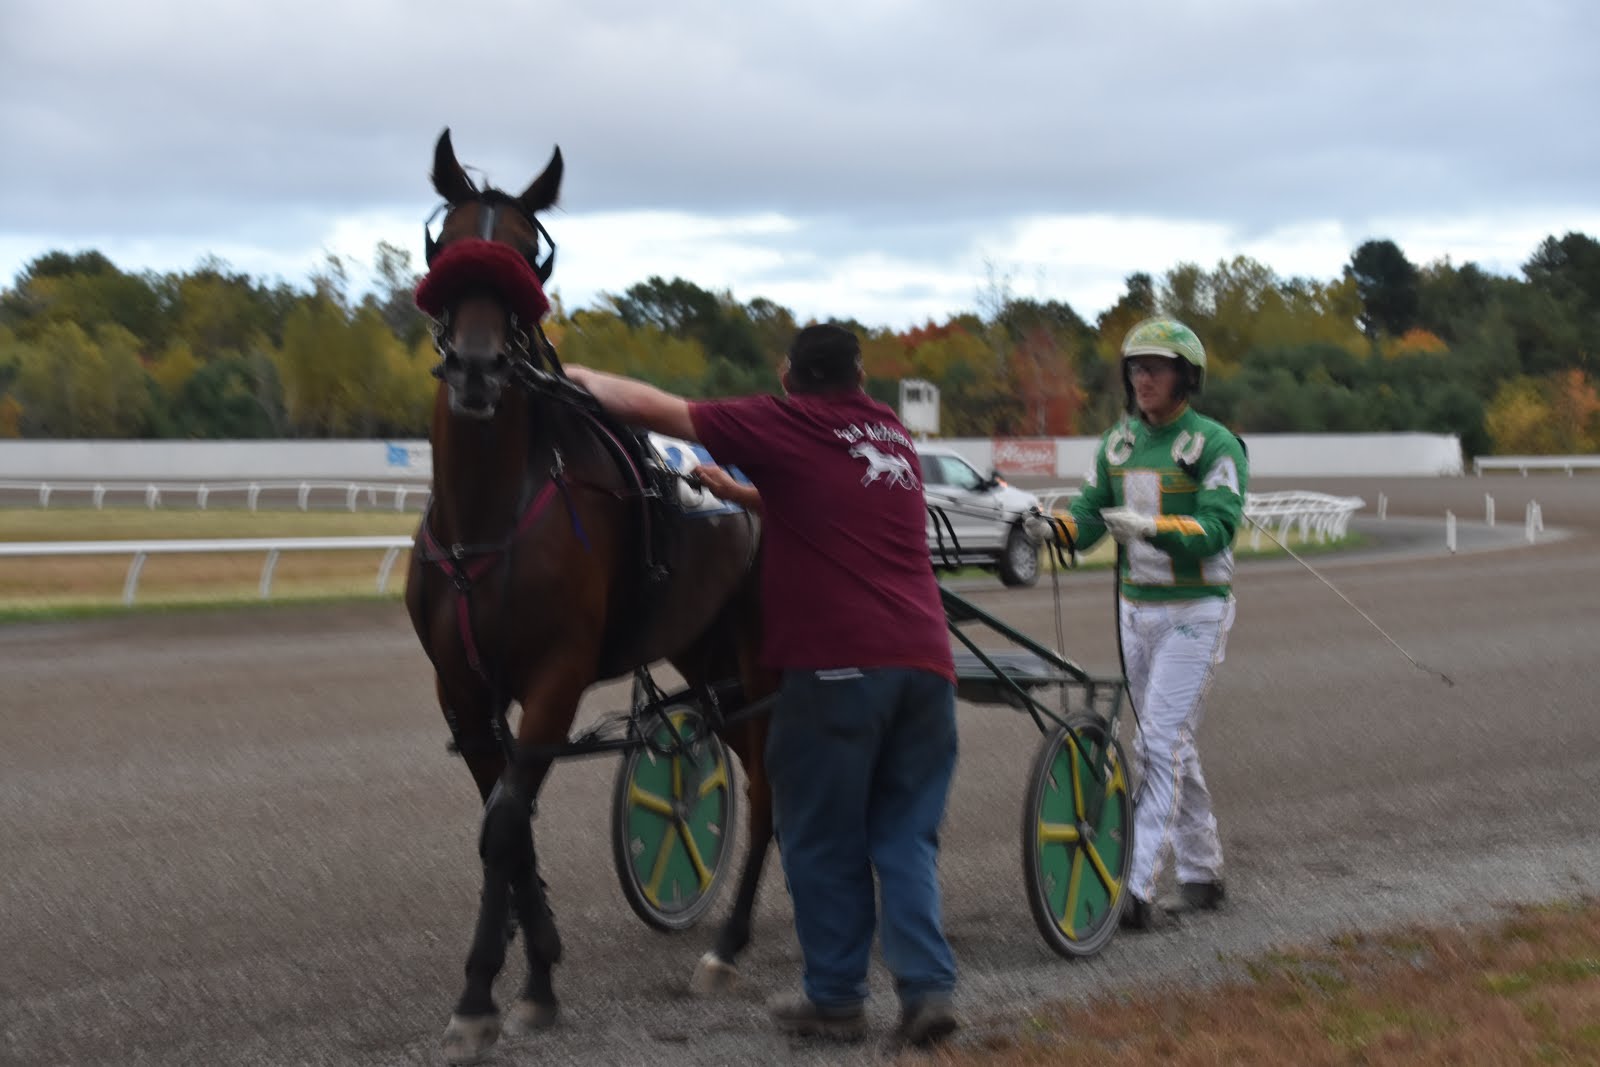 The Maine Harness Racing Commission